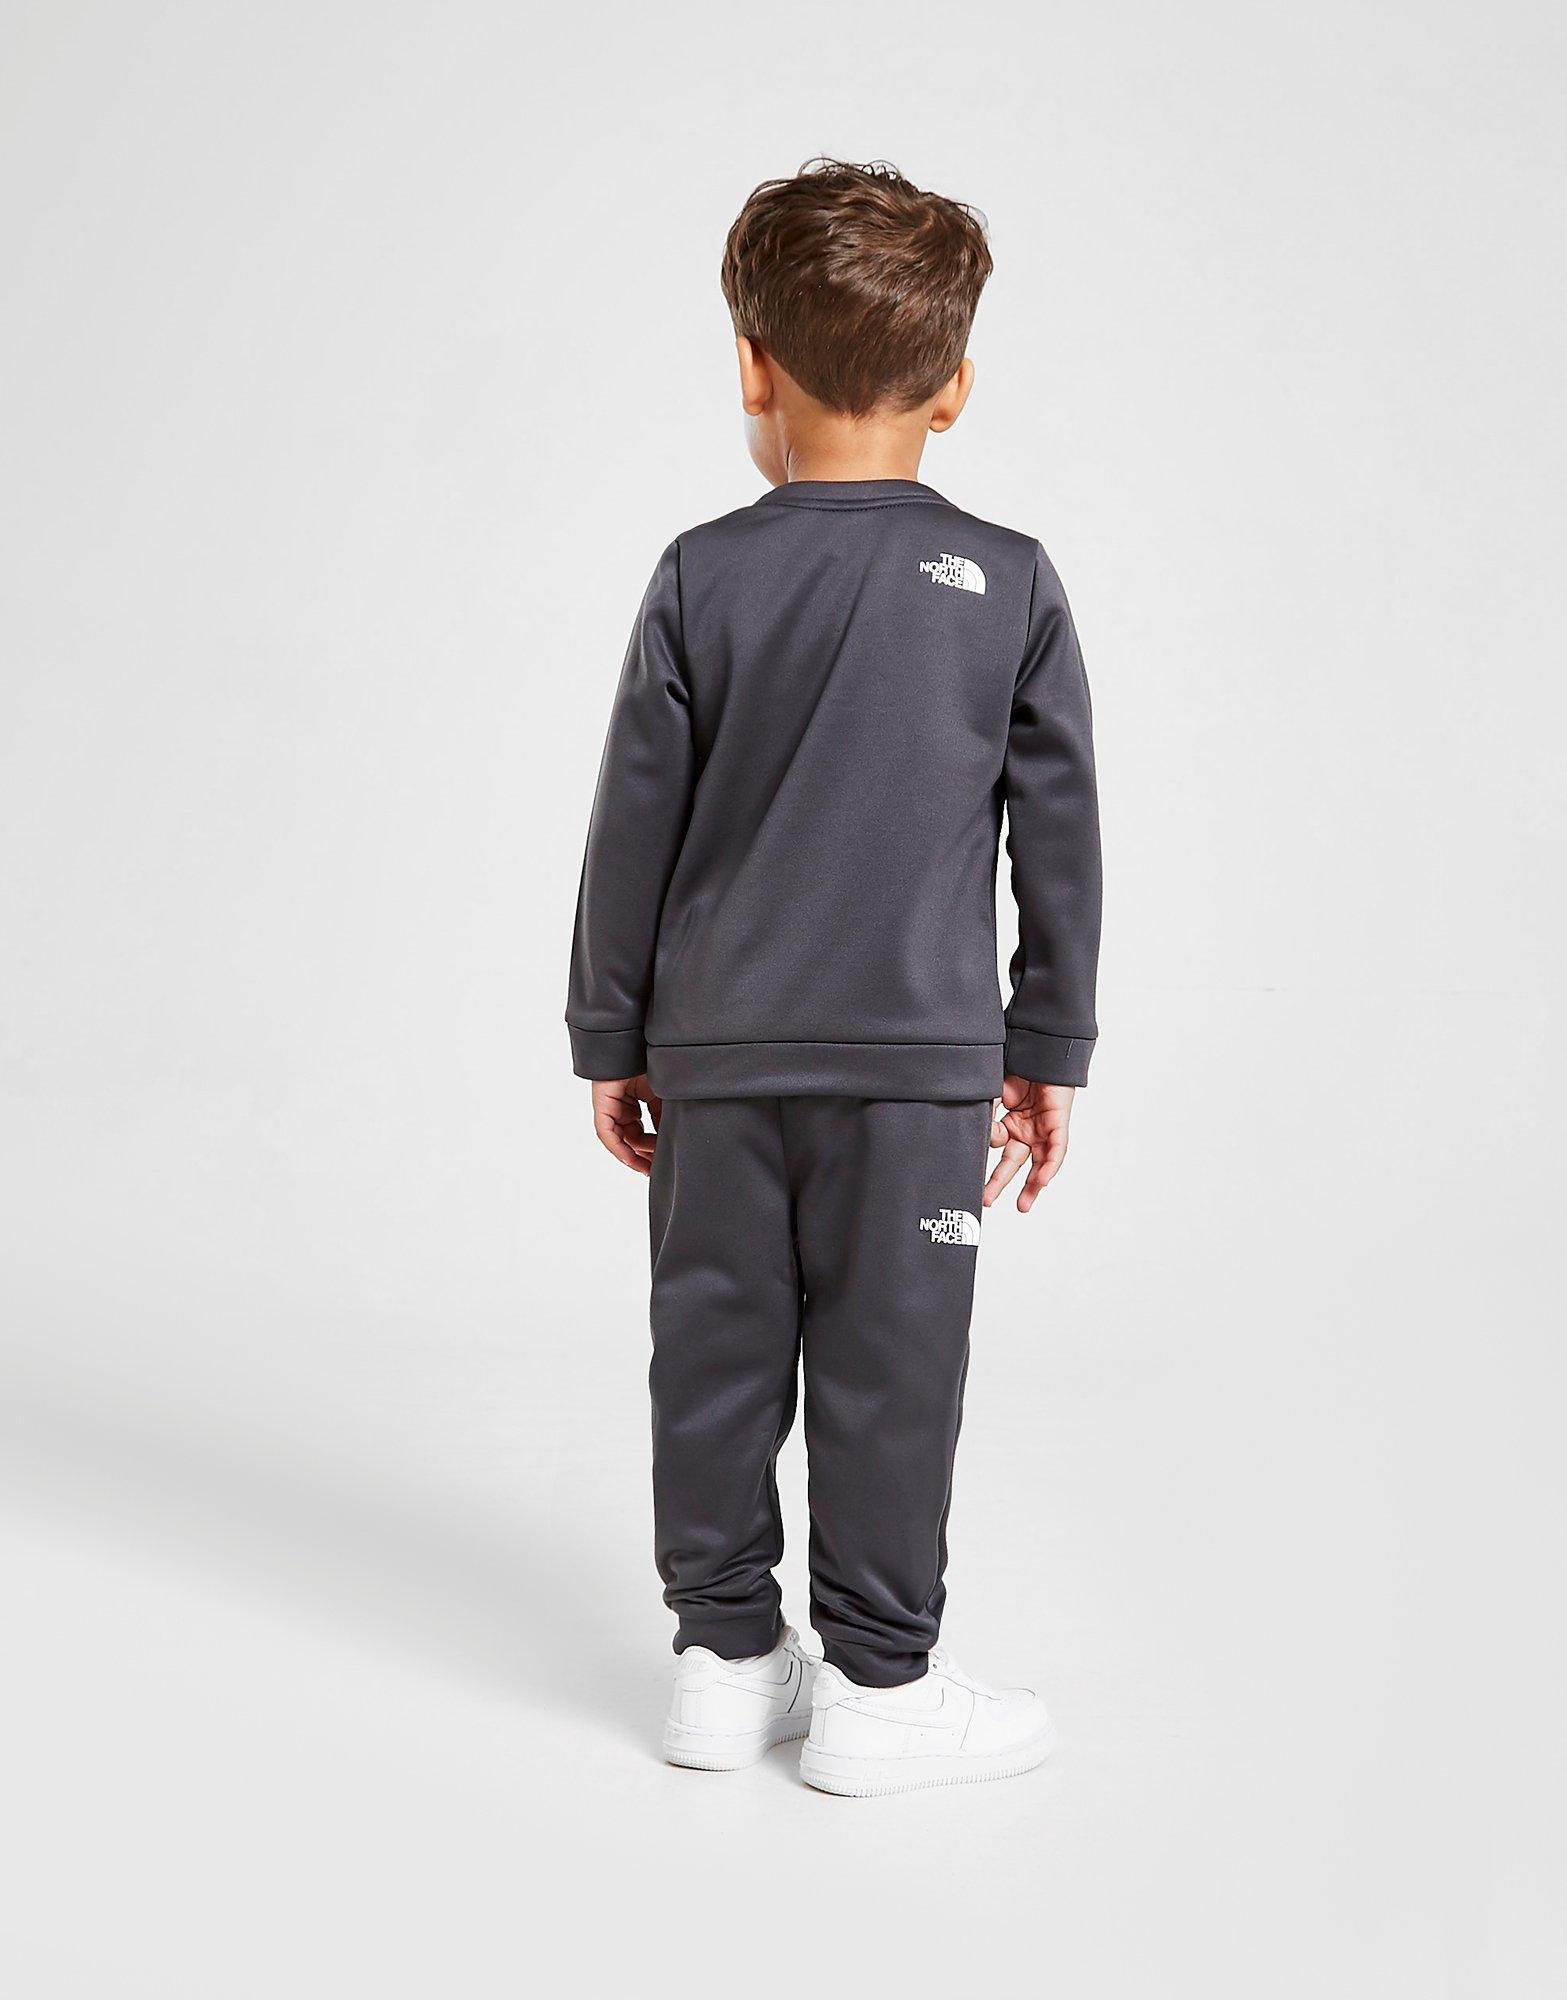 toddler north face tracksuit